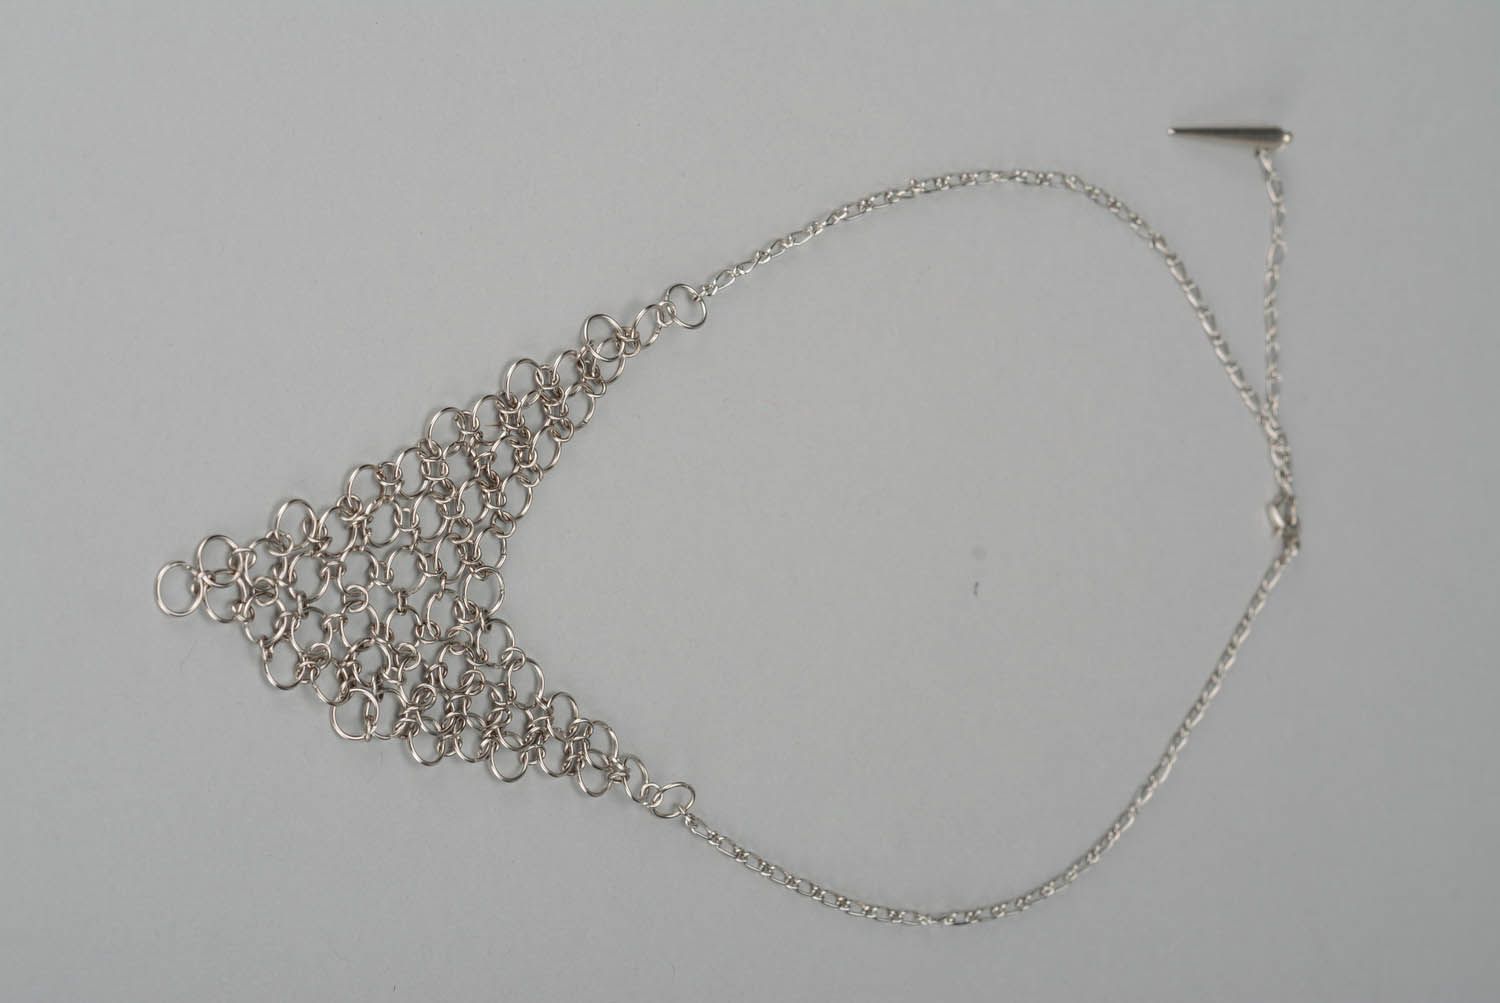 Necklace made of metal rings photo 3